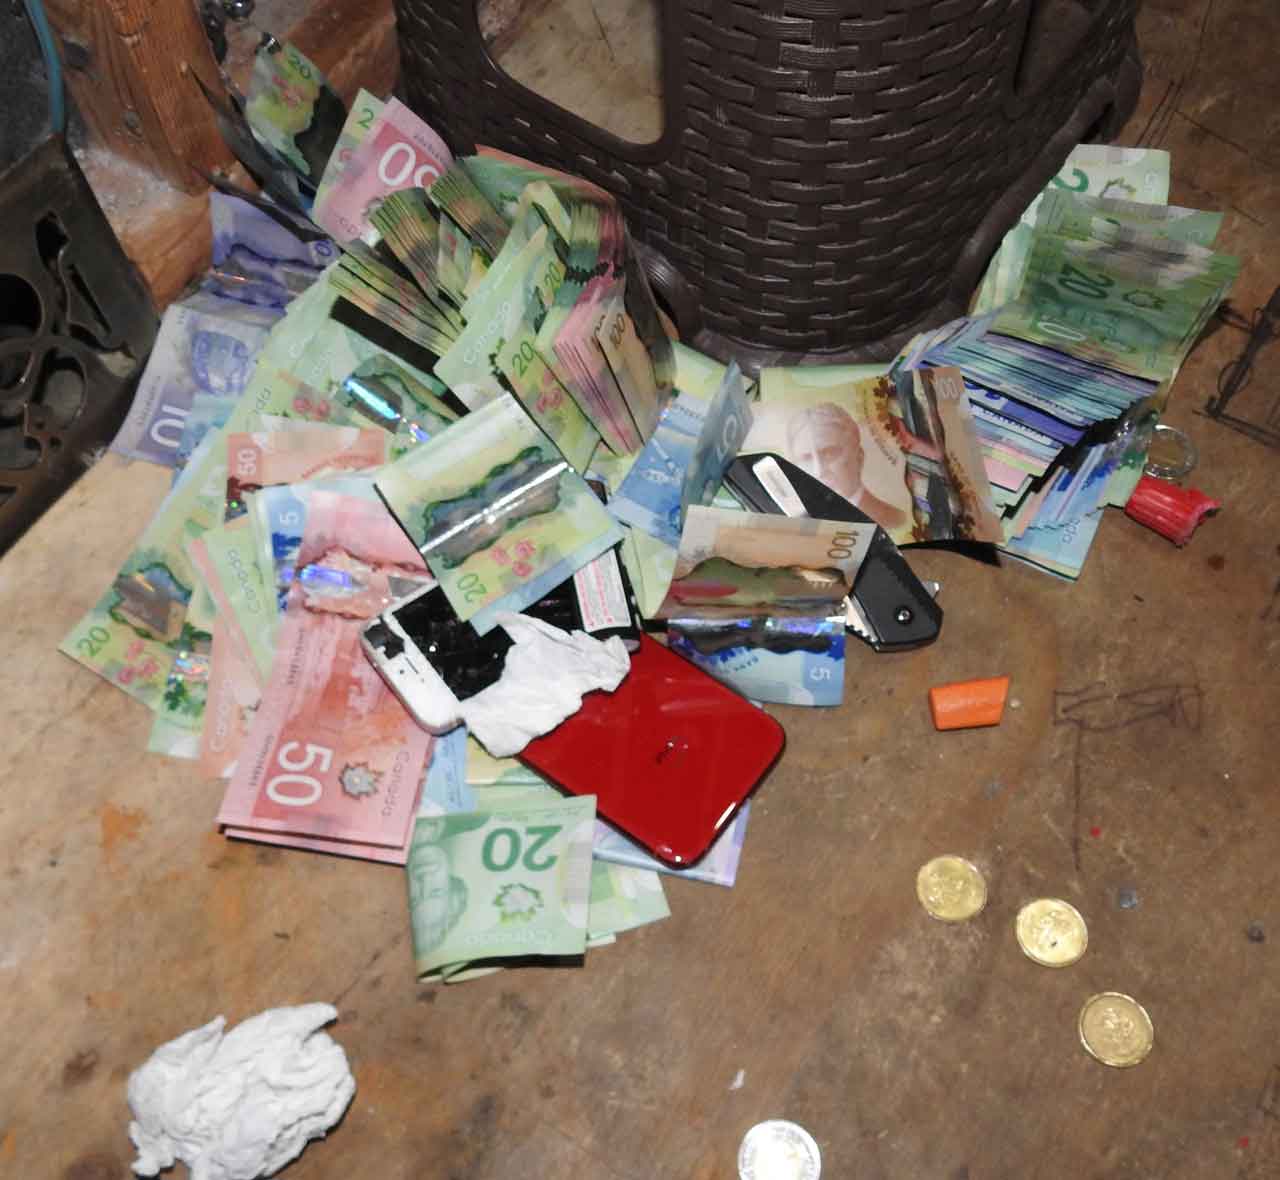 Thunder Bay Police Uncover Drug Trafficking Operation; Suspects Apprehended